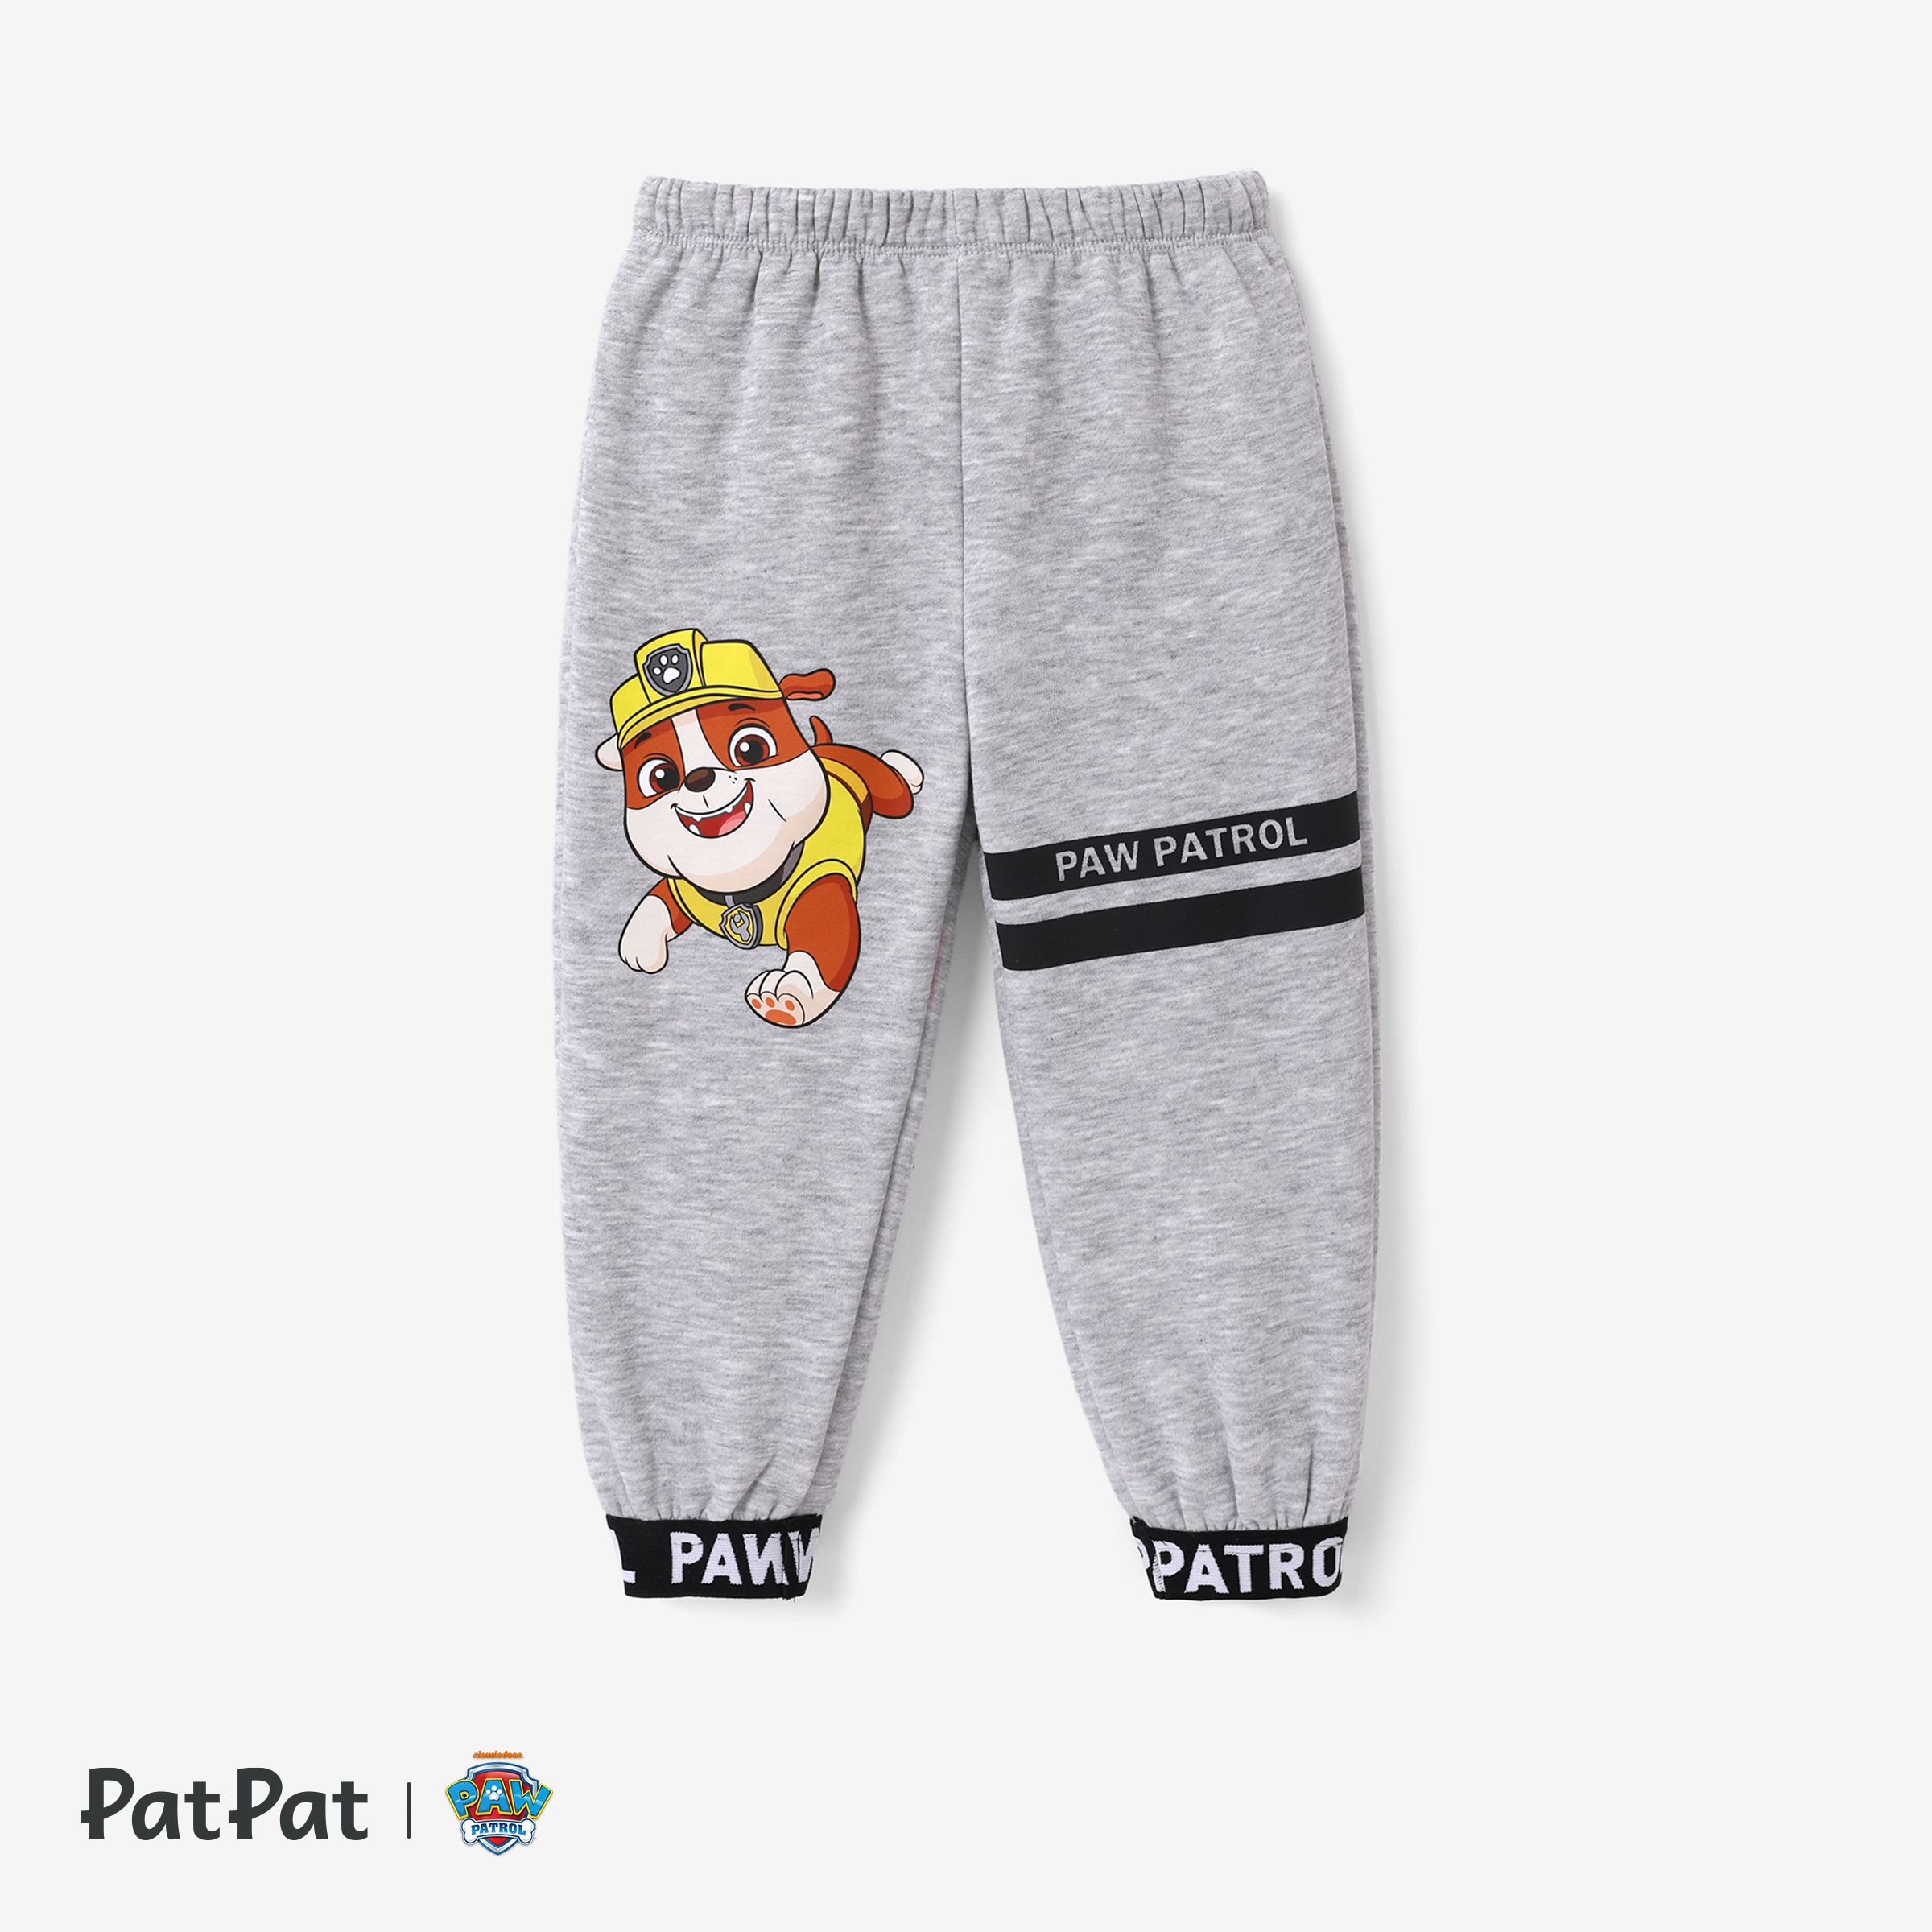 PAW Patrol Toddler Boys/Girls Creative Letter Foot Casual Sports Pants